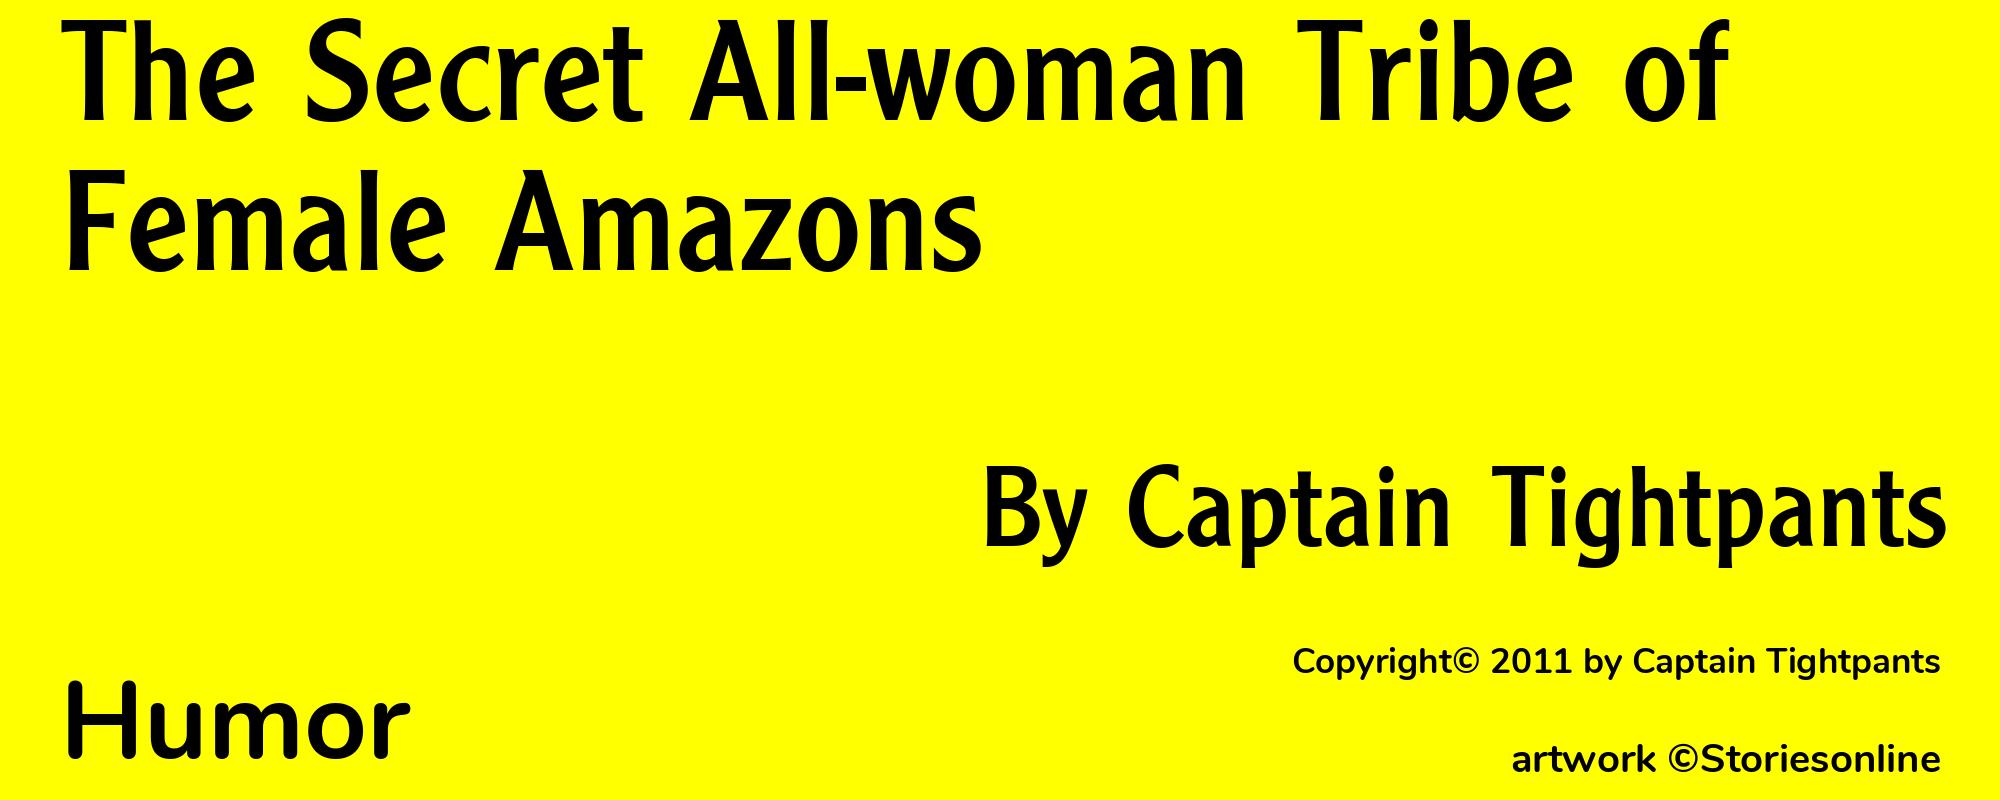 The Secret All-woman Tribe of Female Amazons - Cover